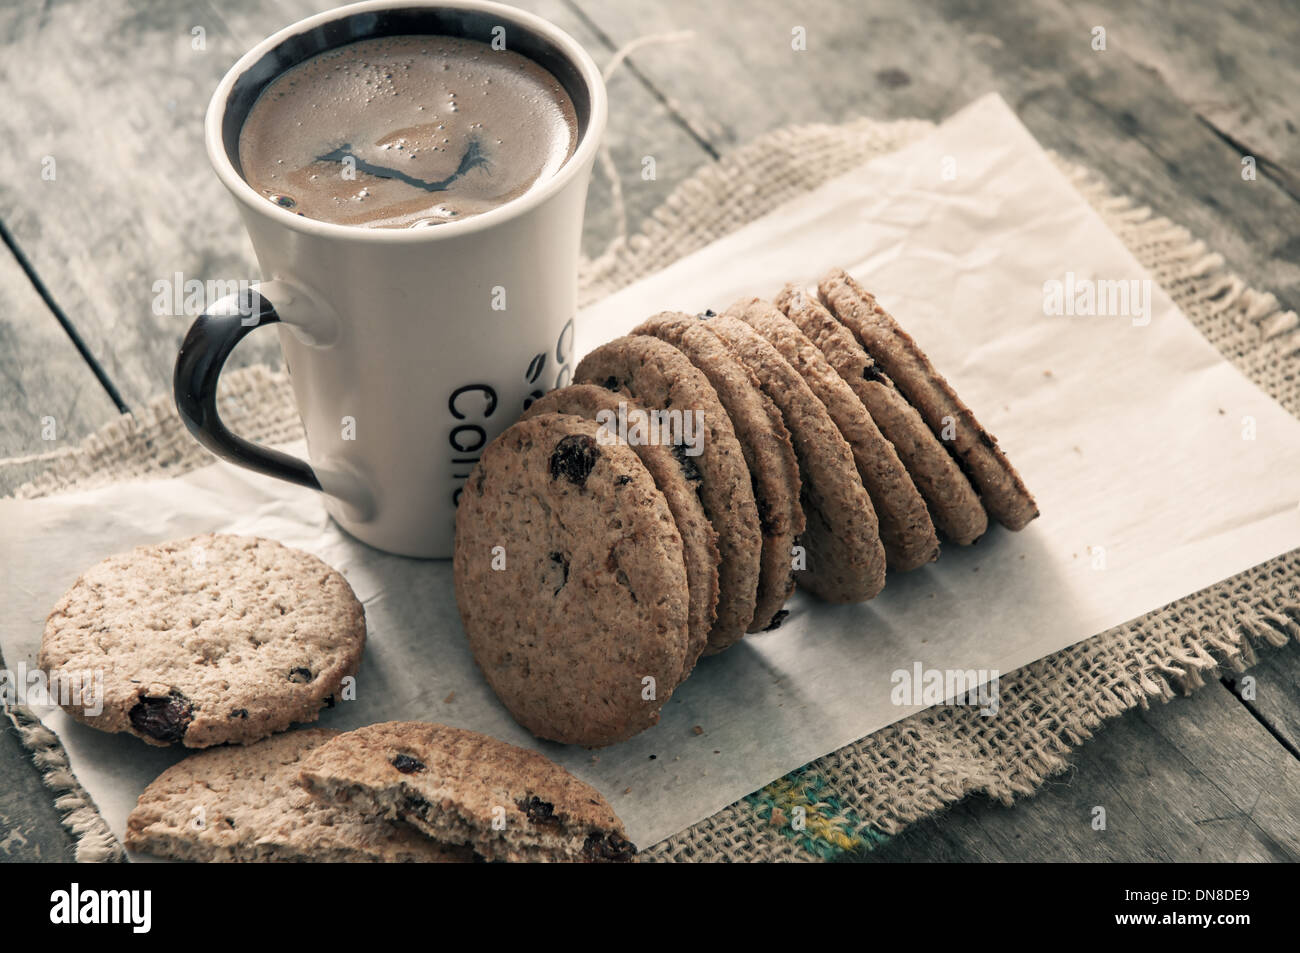 cookies and coffee on old wooden table, close up Stock Photo